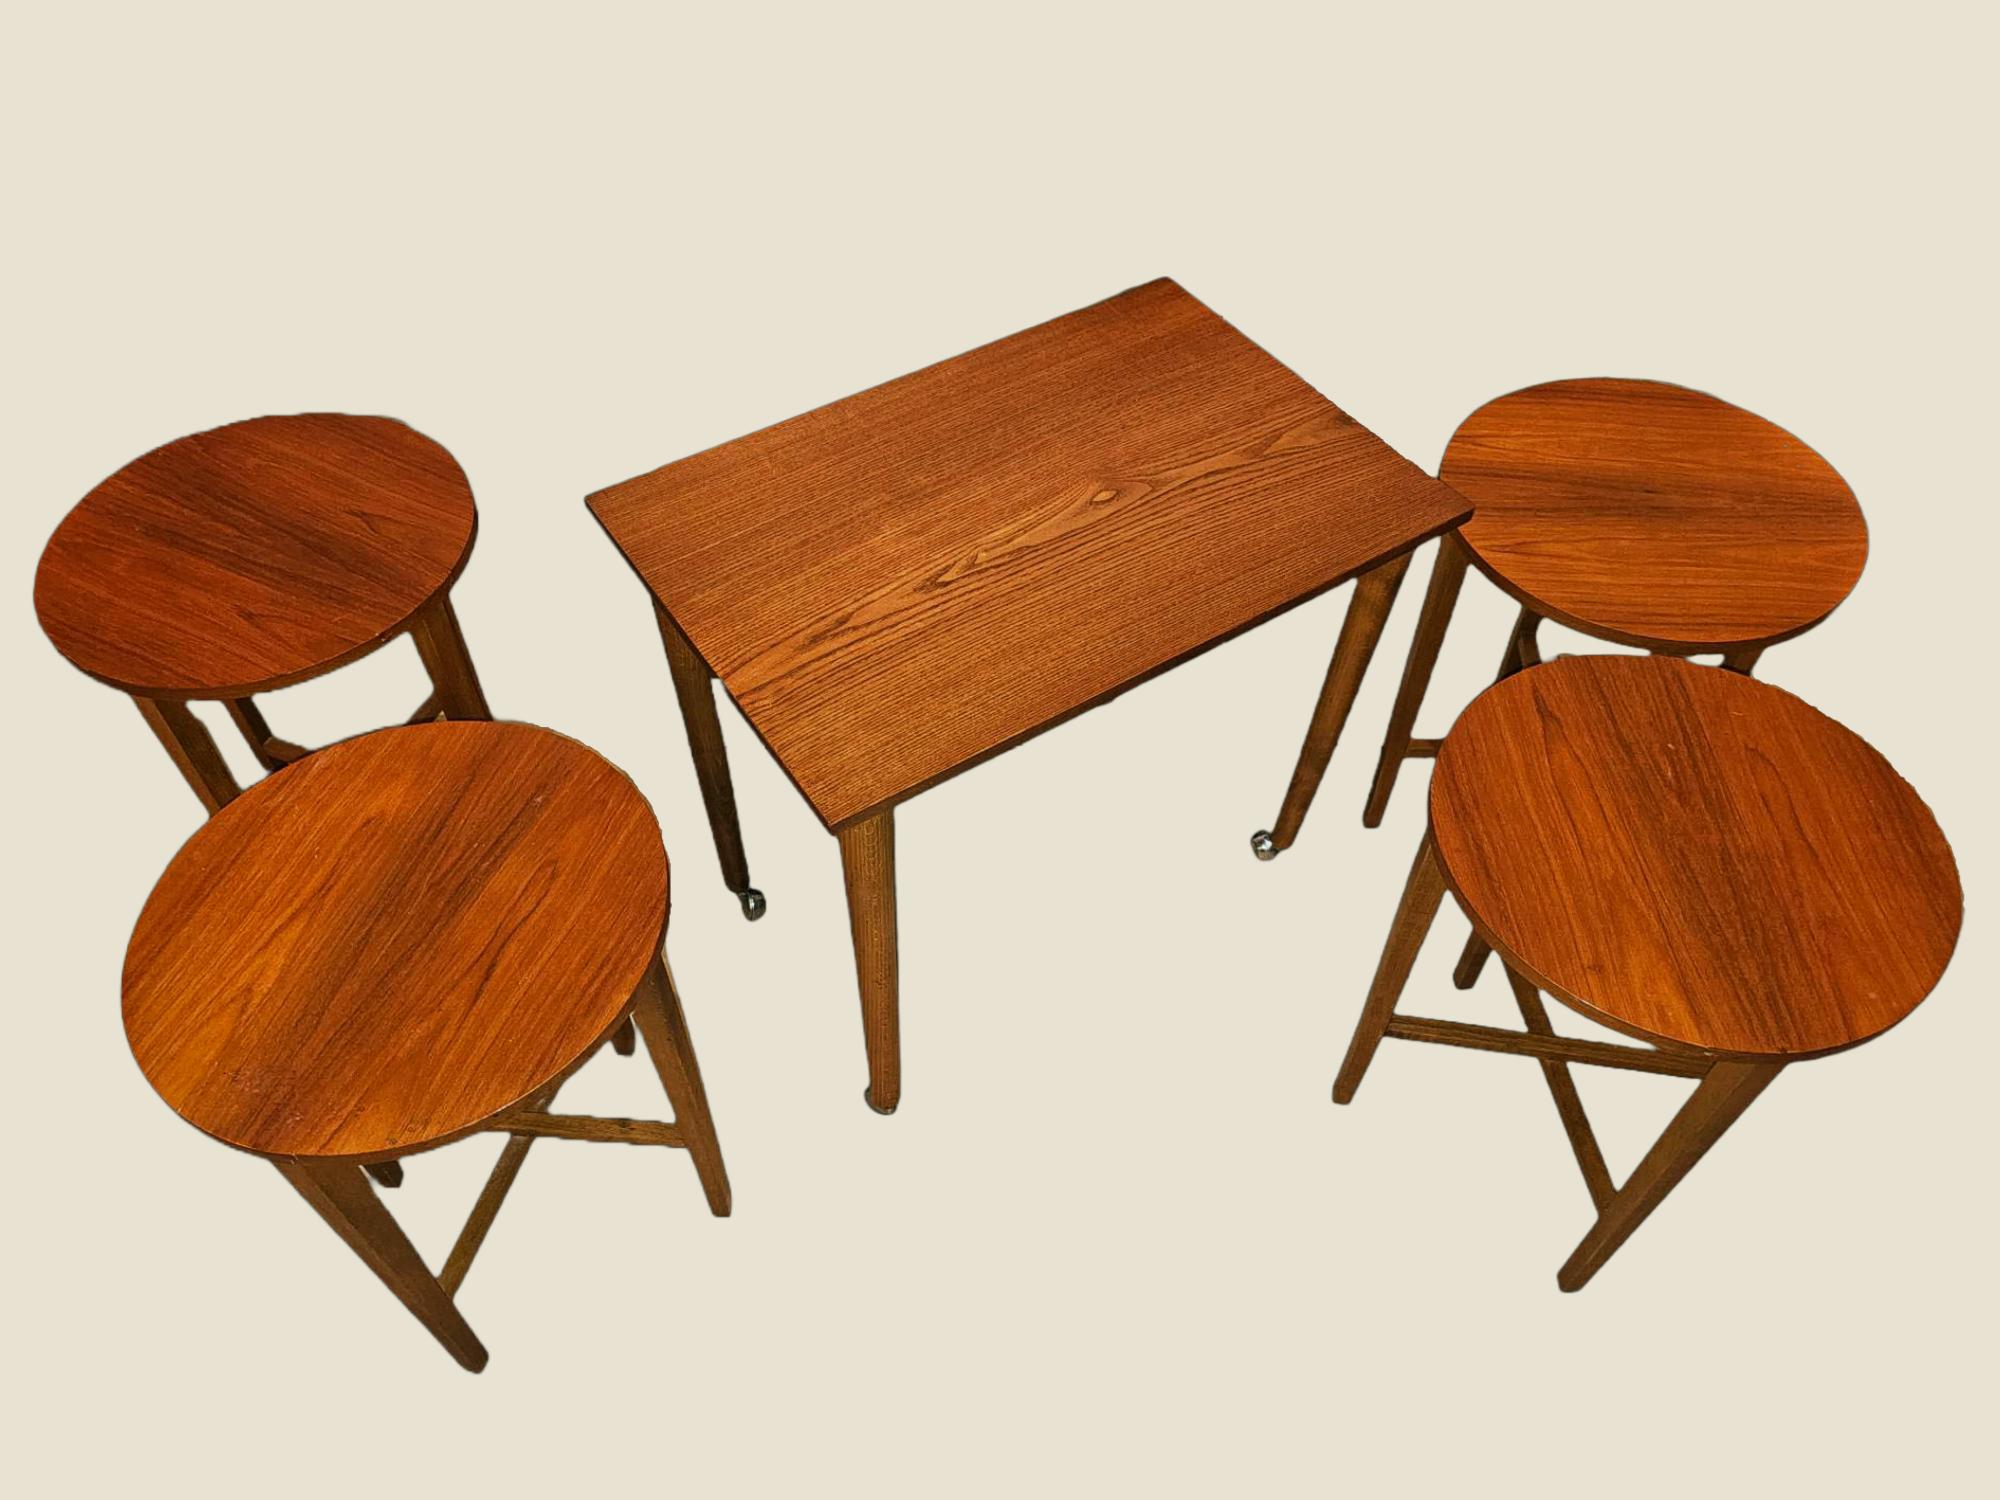 This unique set was designed by Poul Hundevad for Novy Domov - dated in the late 1960s. The largest table is rectangular and is featured with wheels and houses 4 folding round tables, in which each can be collapsed and stored underneath the main